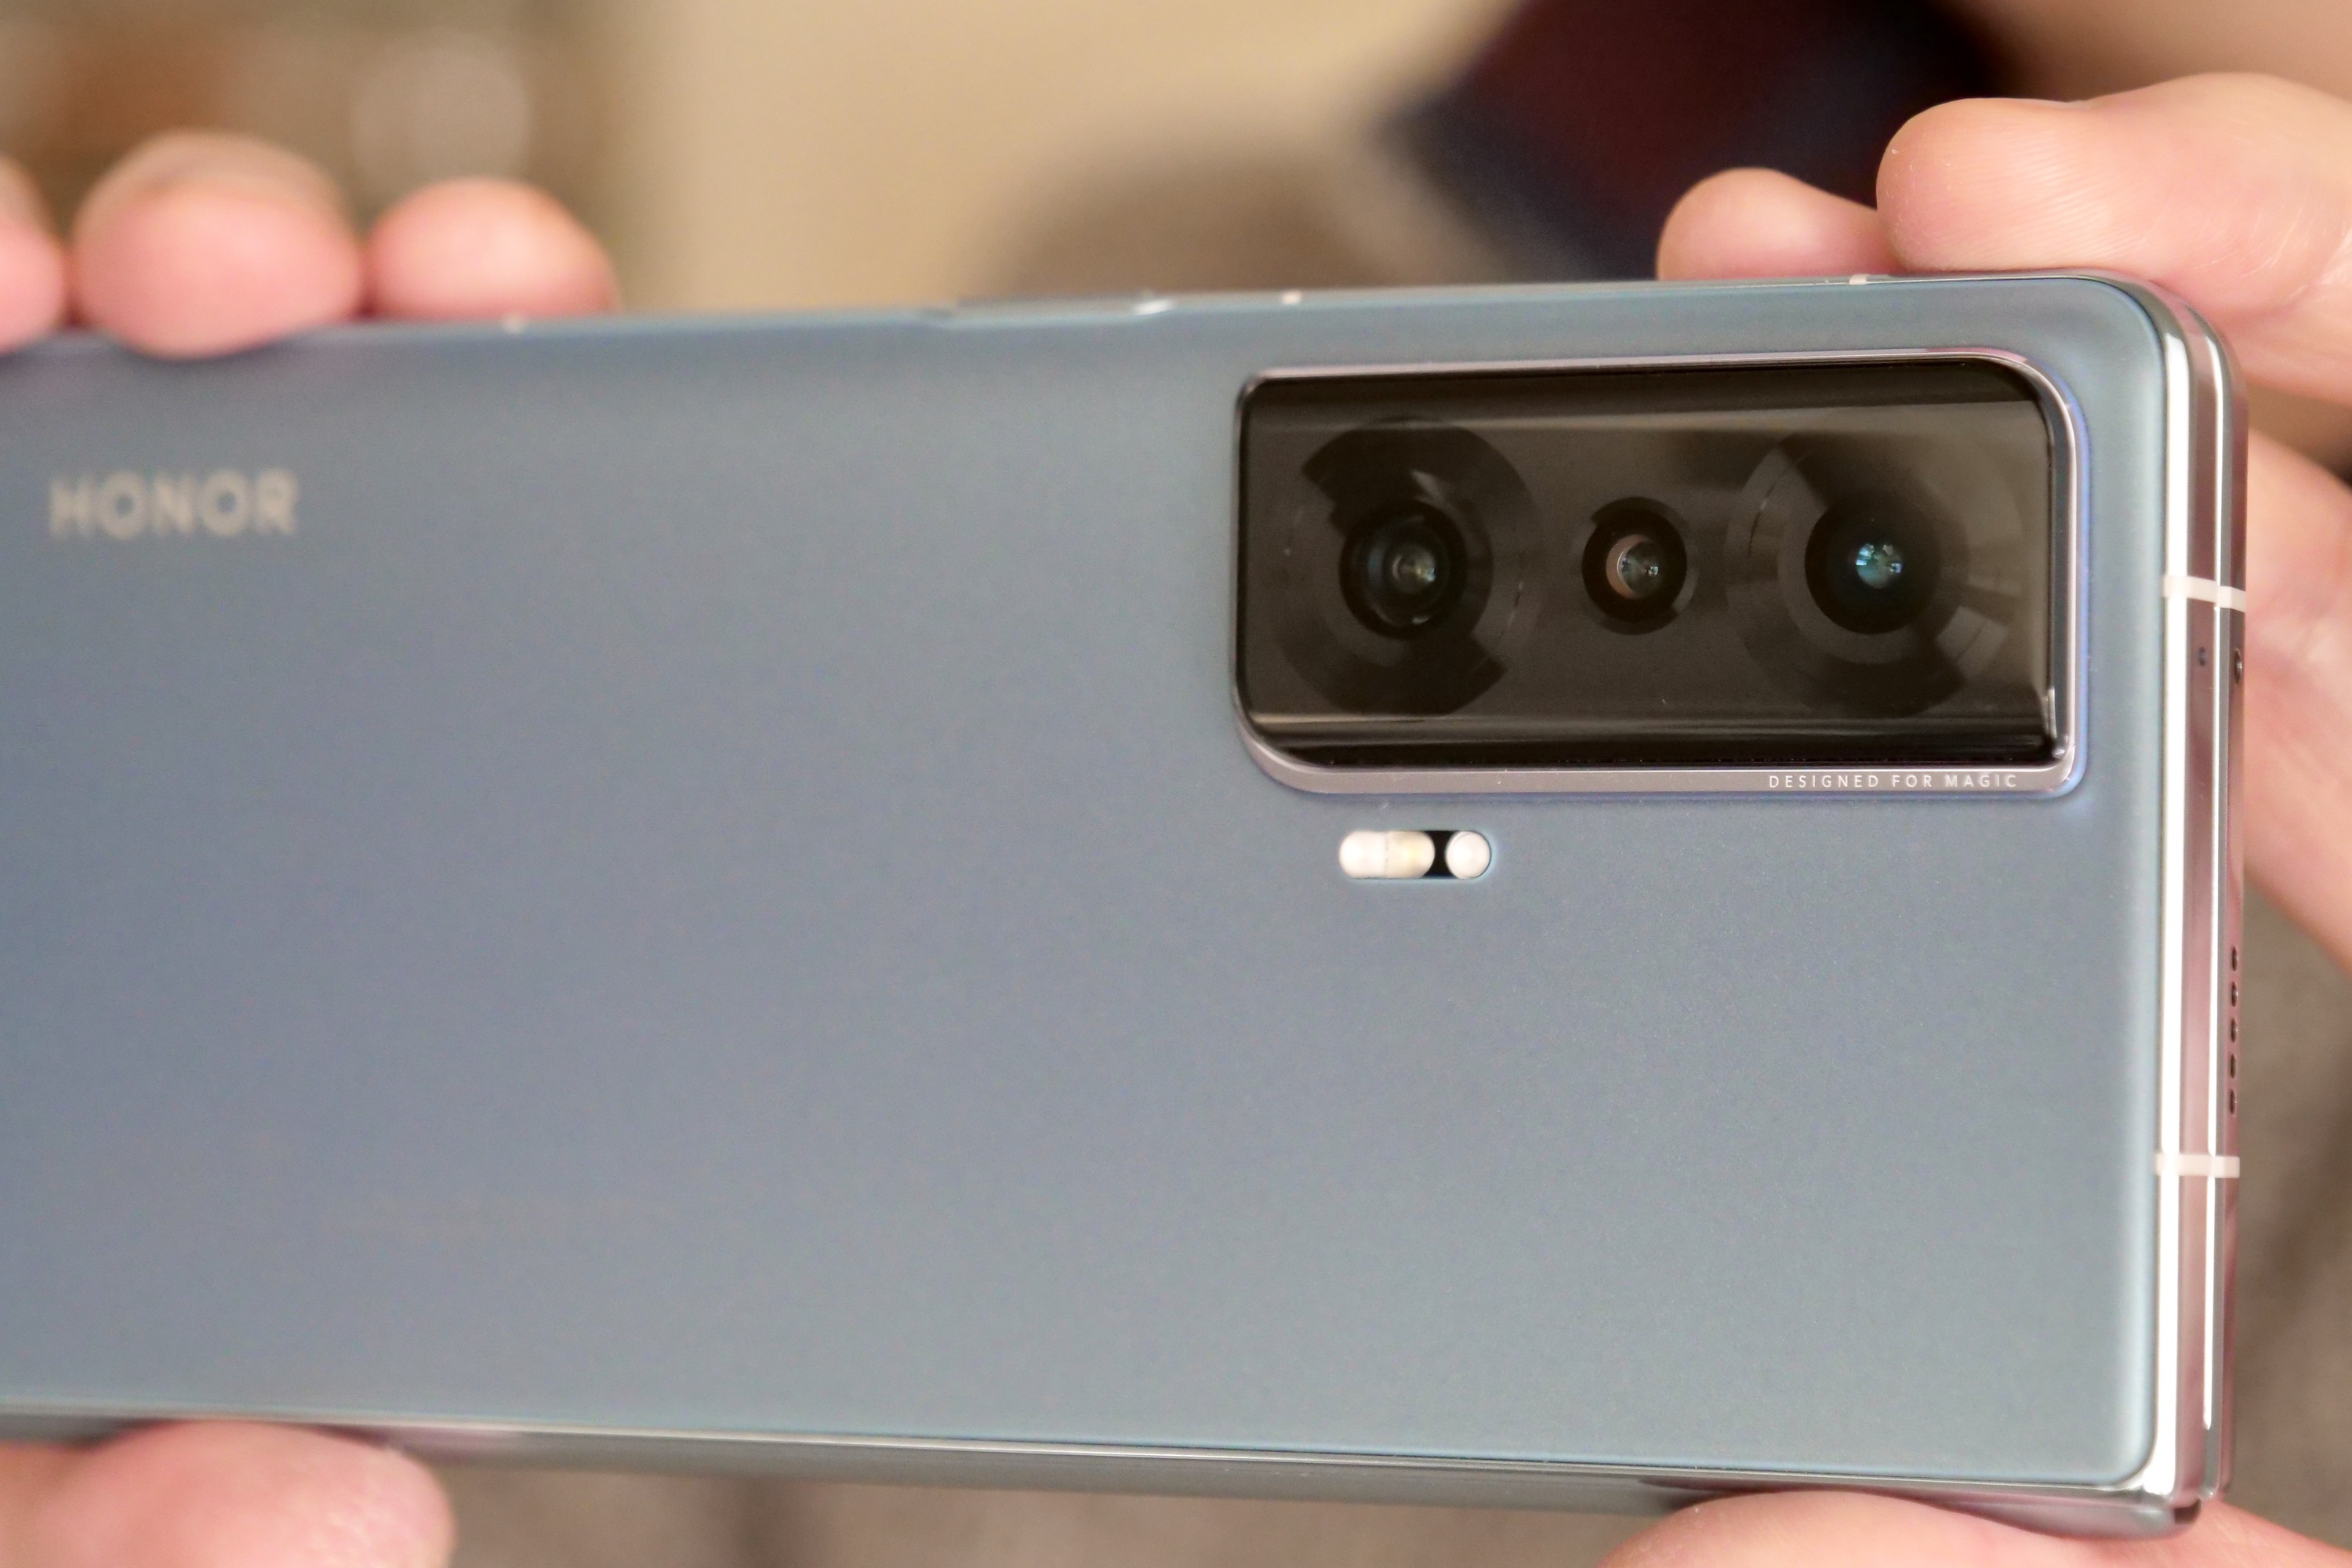 Honor Magic Vs 5G Review: Magic Hardware And Missed Opportunities